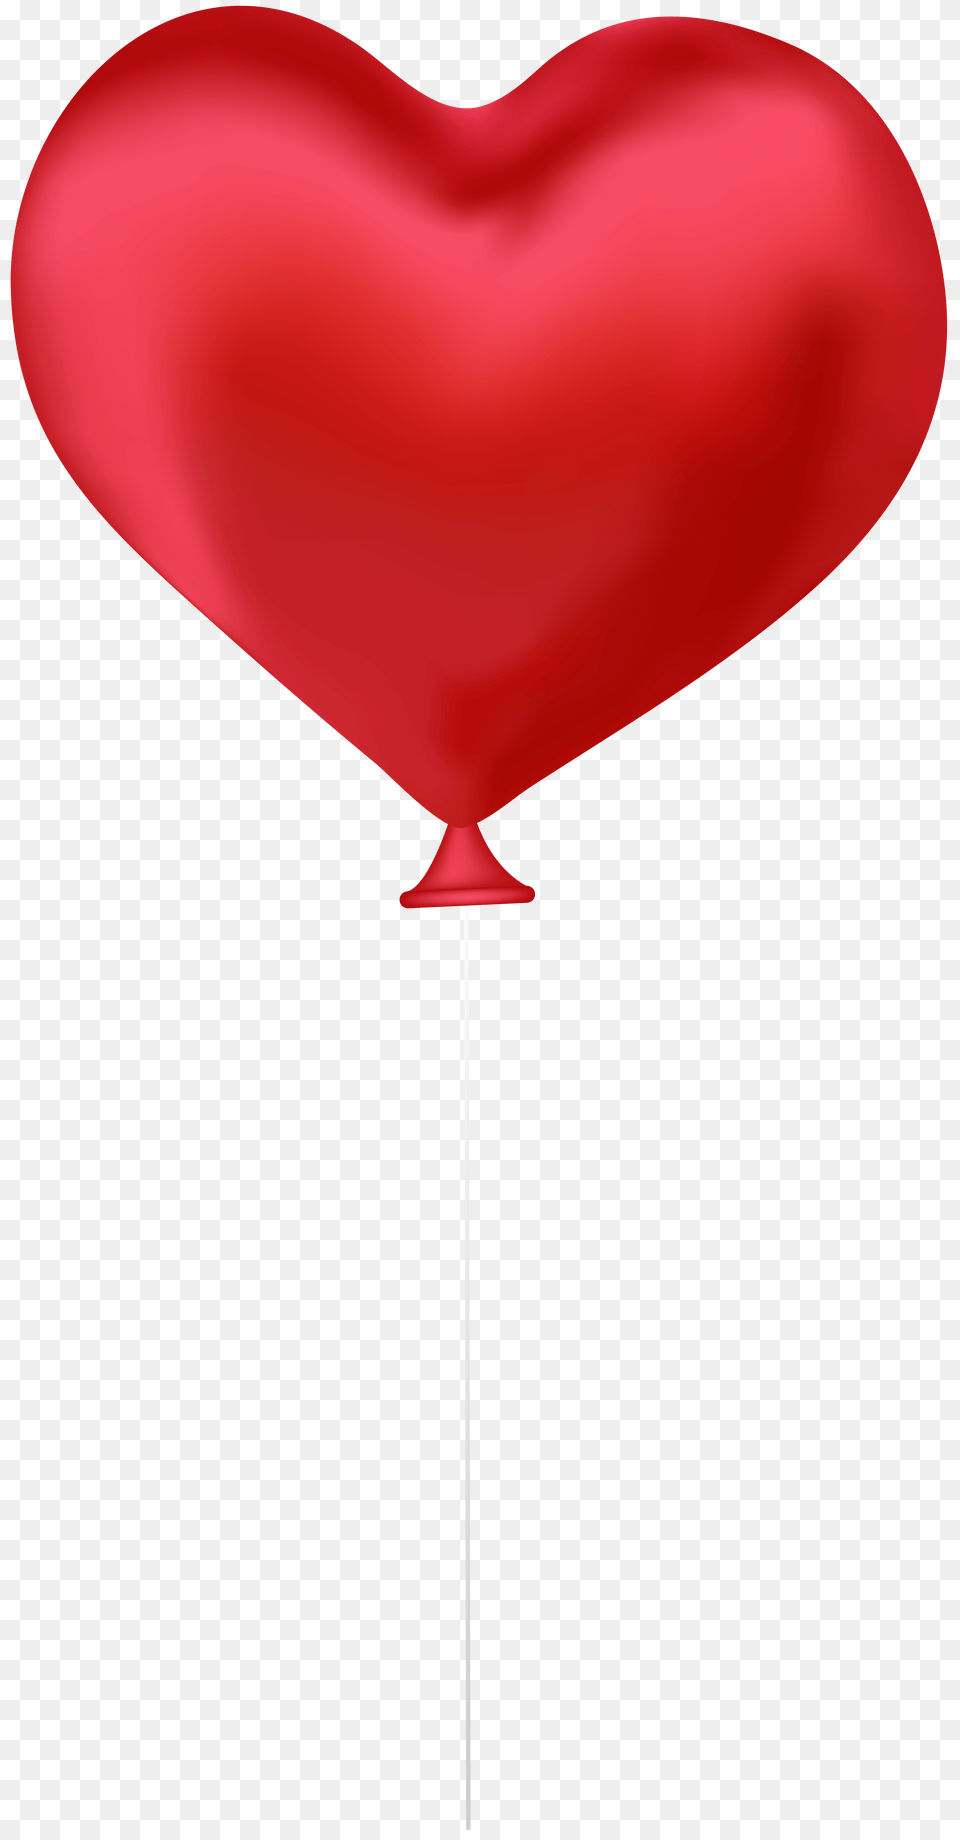 Red Heart Balloon Clip Art, Food, Sweets, Candy Png